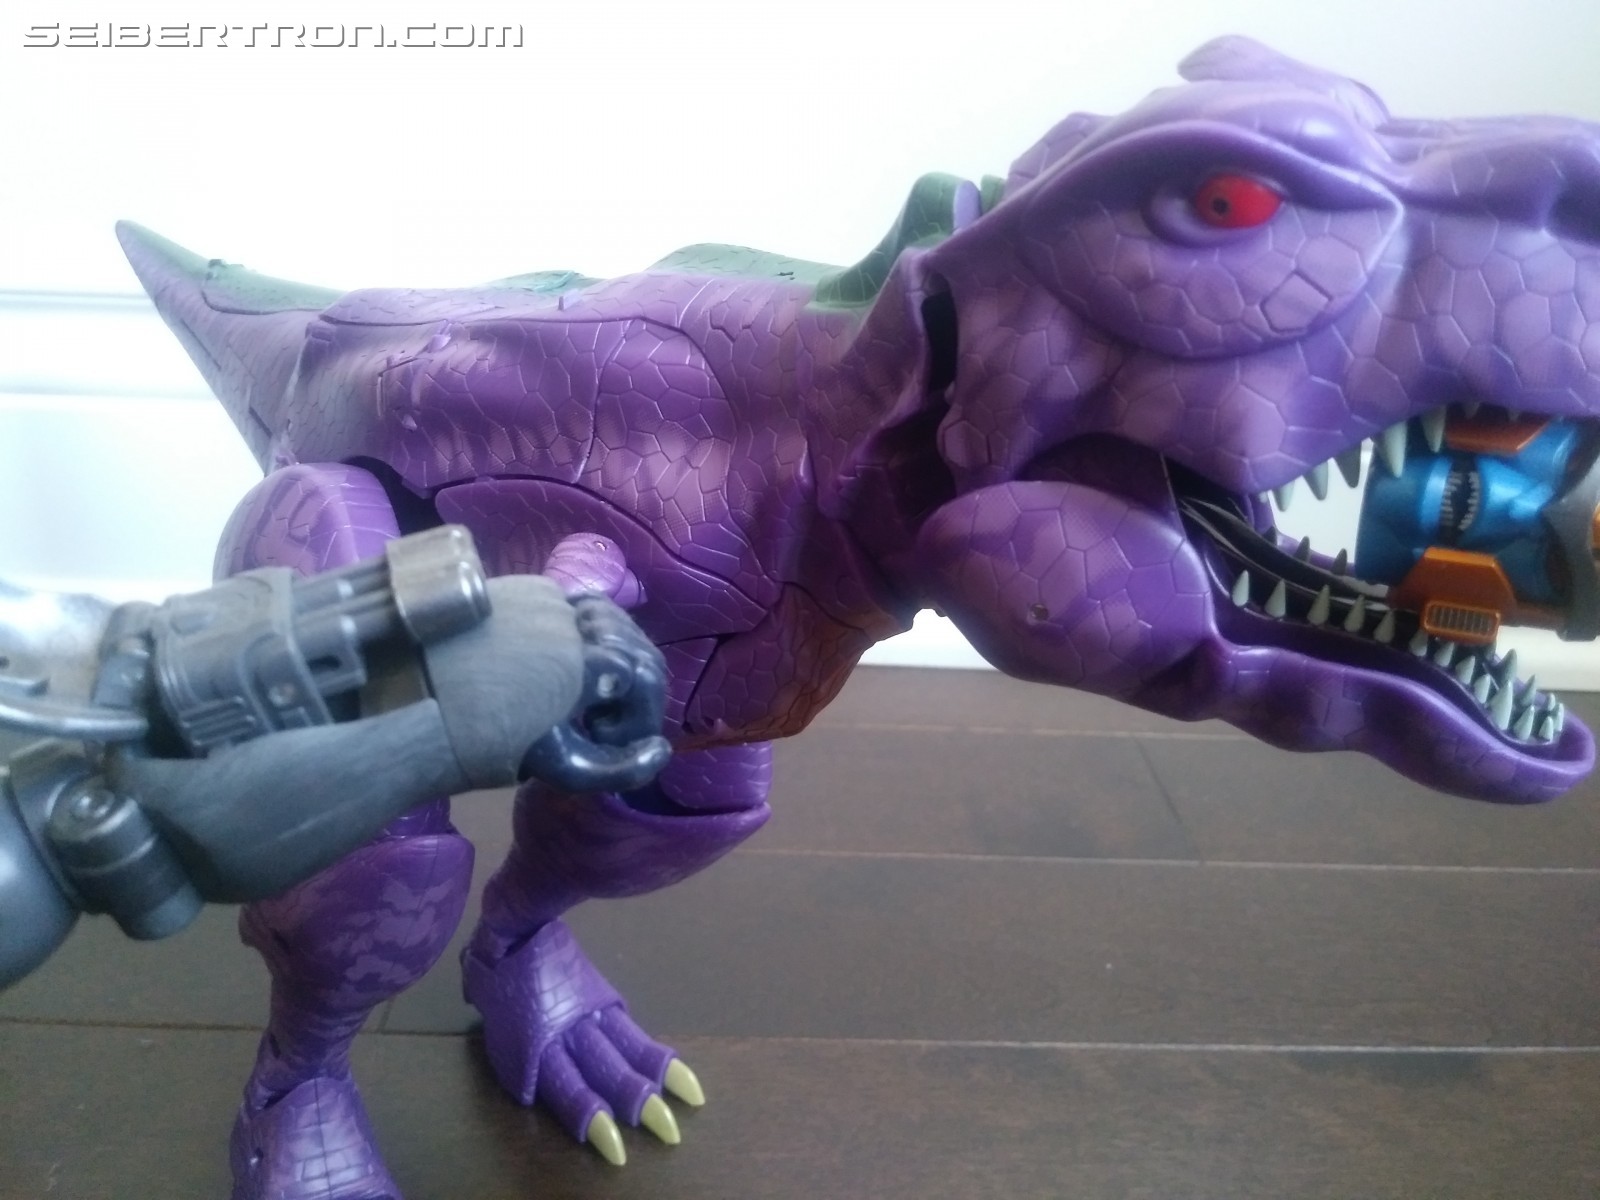 Transformers News: Pictorial Review of Transformers Masterpiece MP-43 Beast Wars Megatron